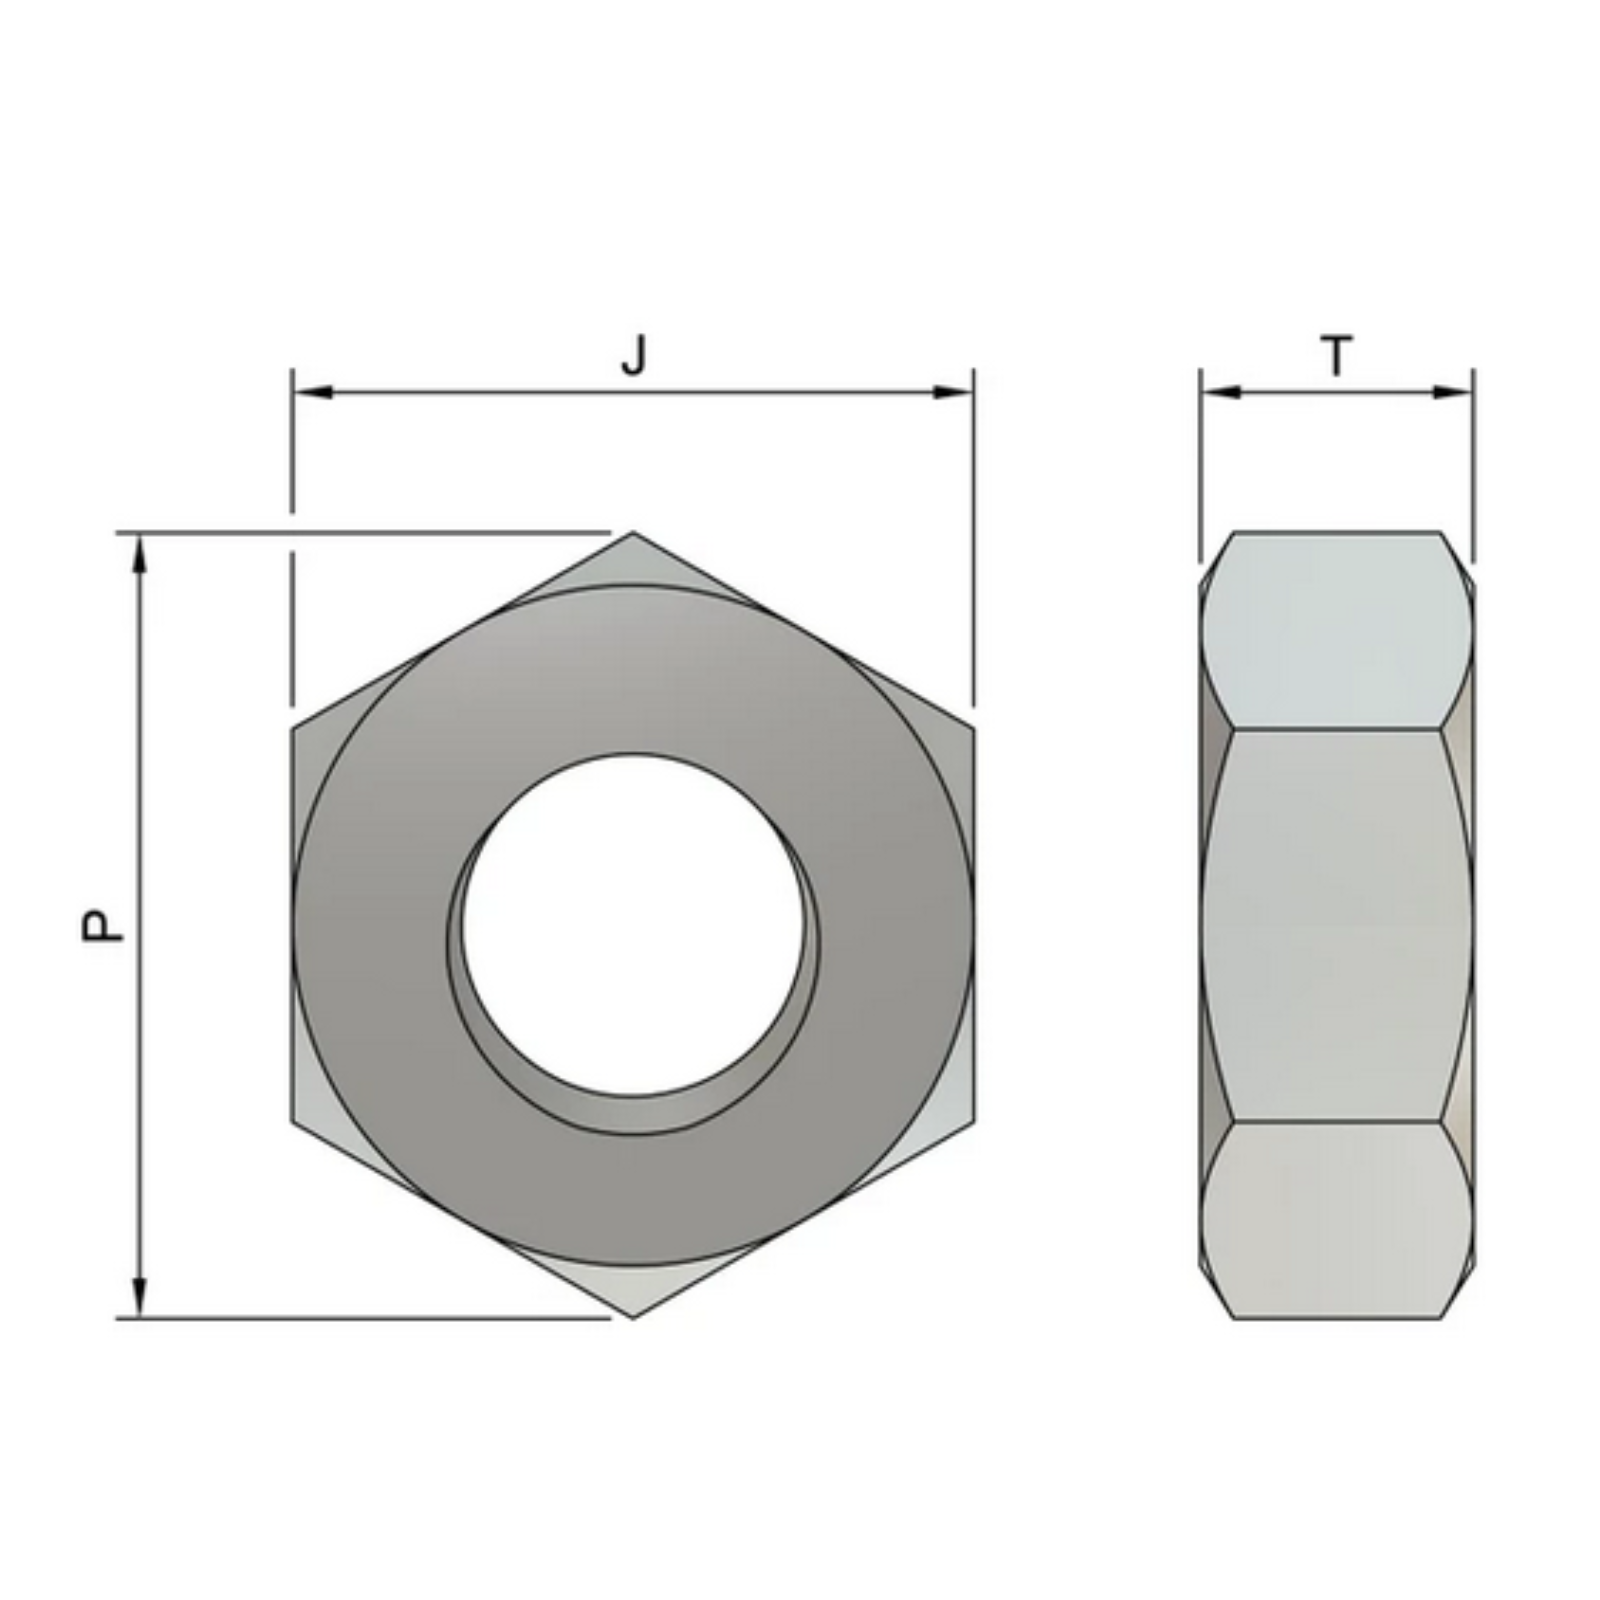 M14 Hexagon Nuts (DIN 934) - Stainless Steel (A4)